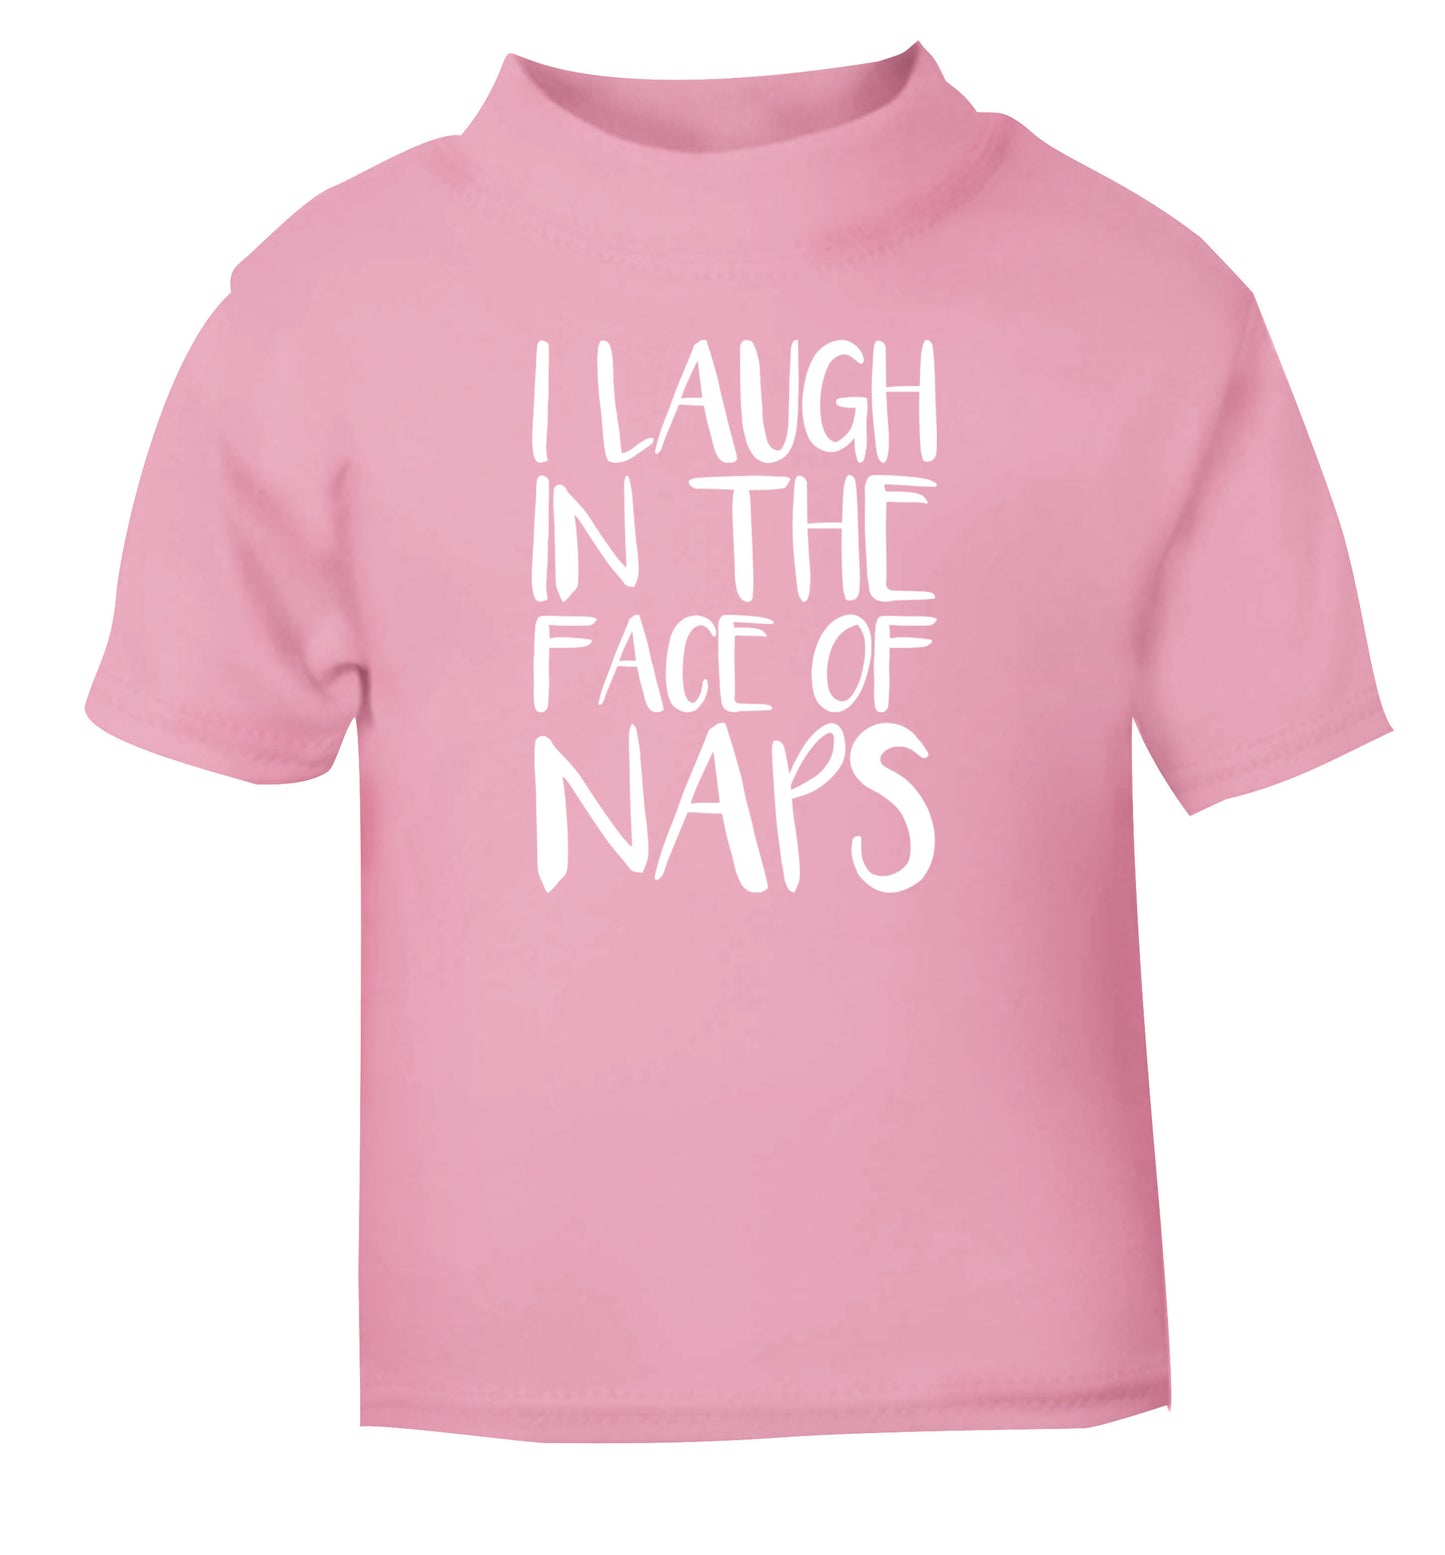 I laugh in the face of naps light pink Baby Toddler Tshirt 2 Years